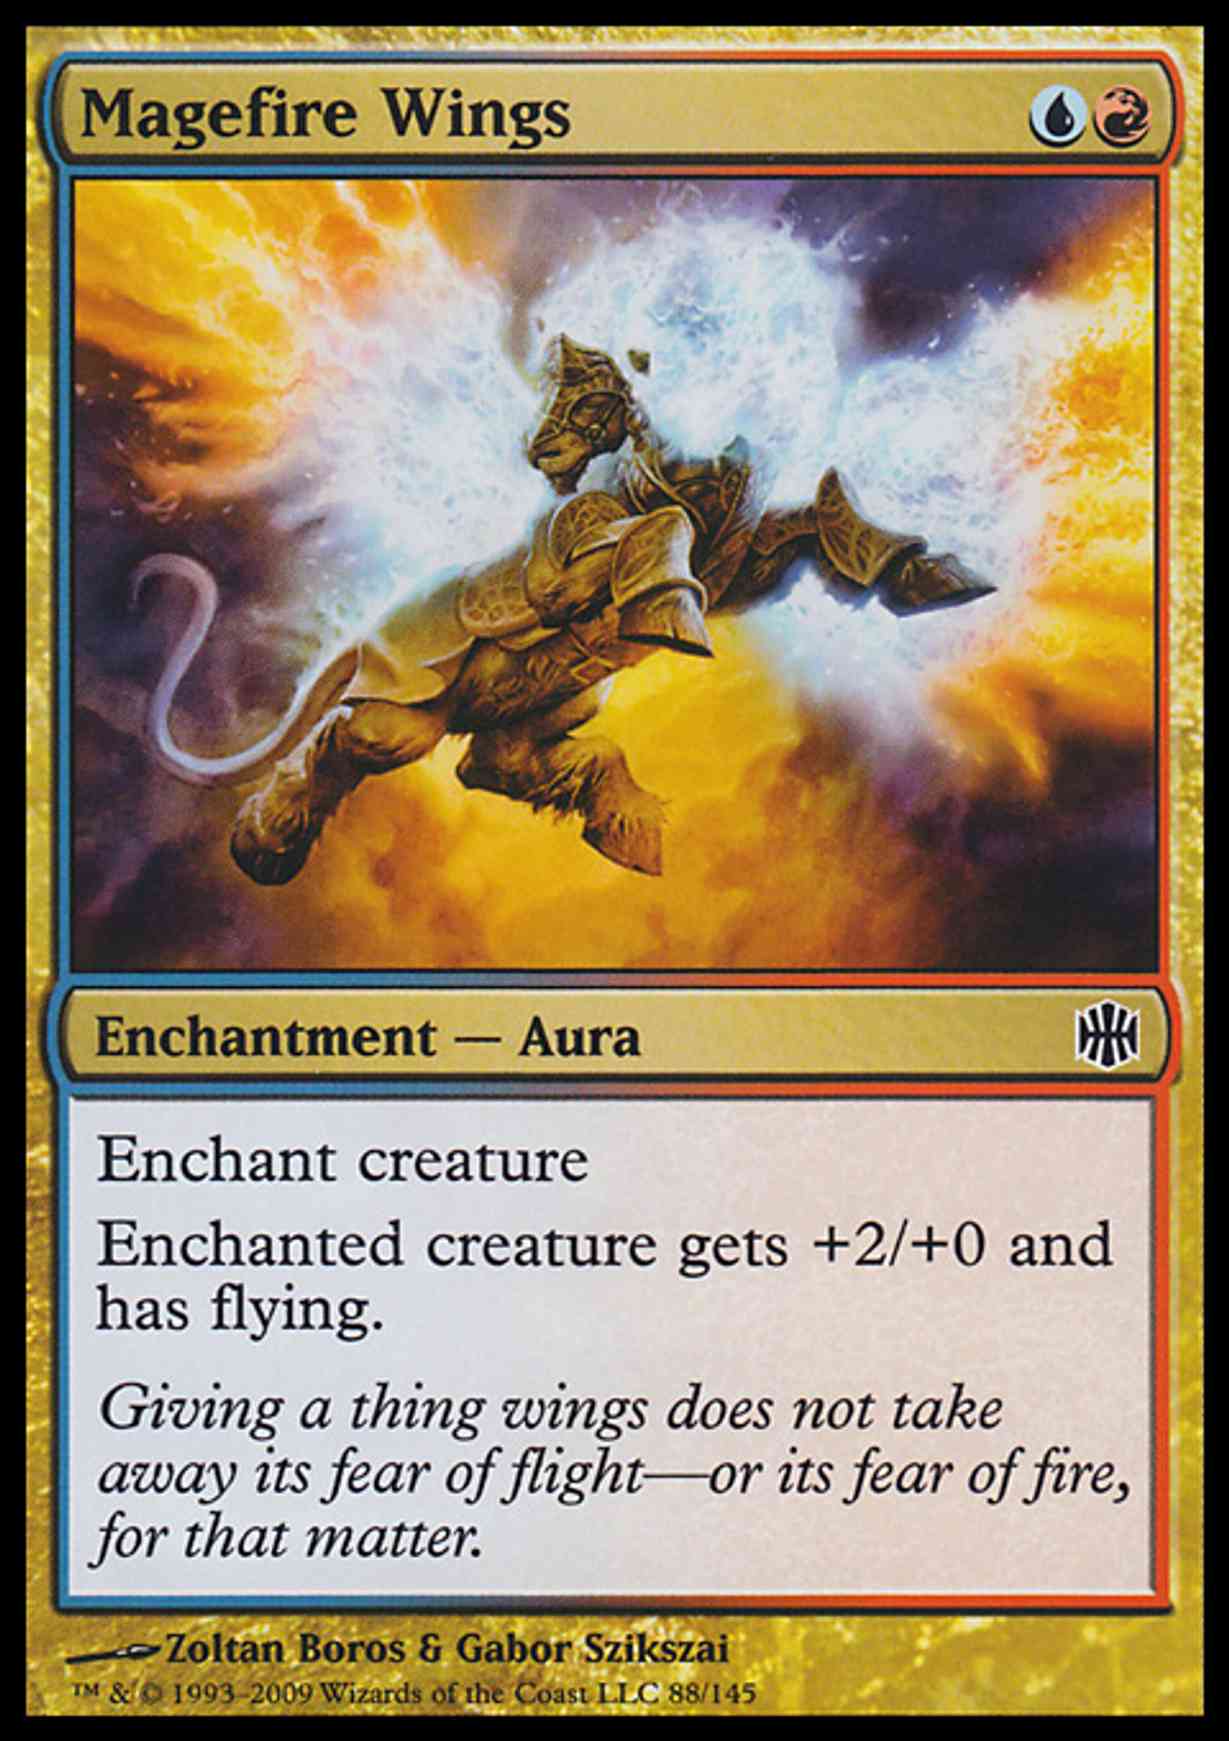 Magefire Wings magic card front